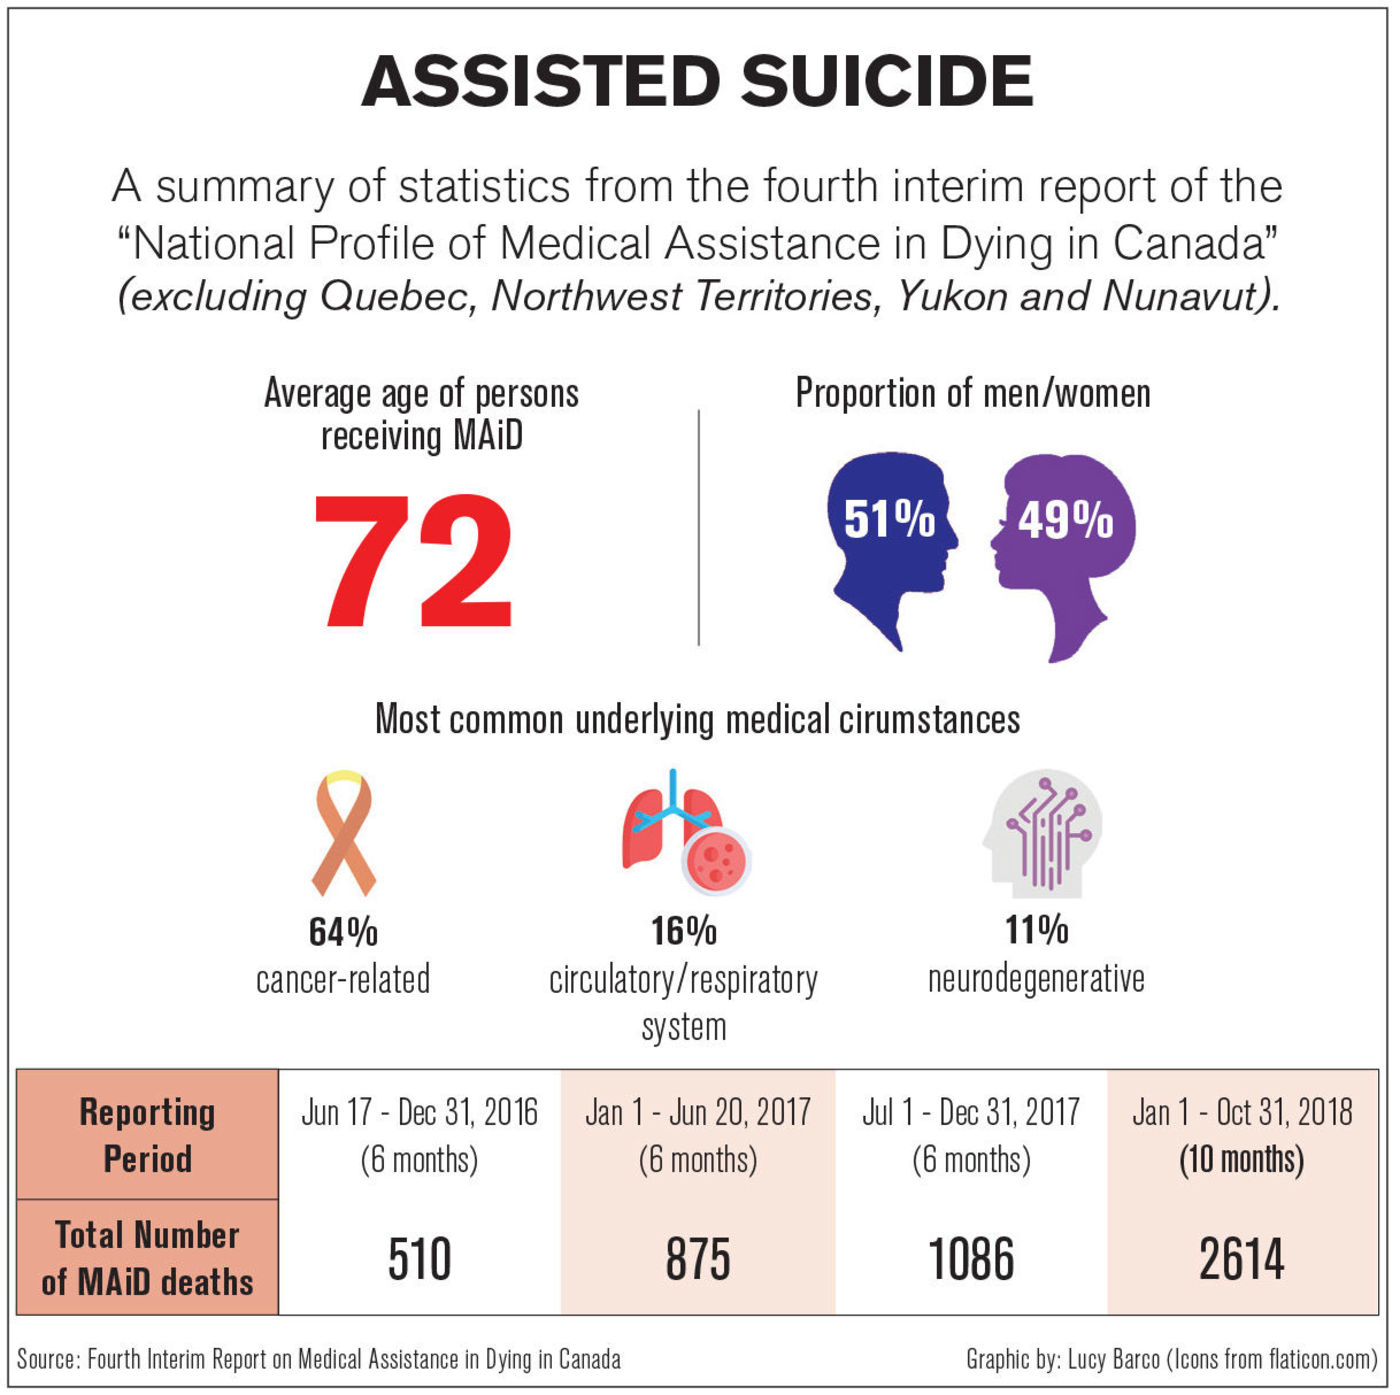 1 in 100 Canadians now dies by euthanasia report BC Catholic